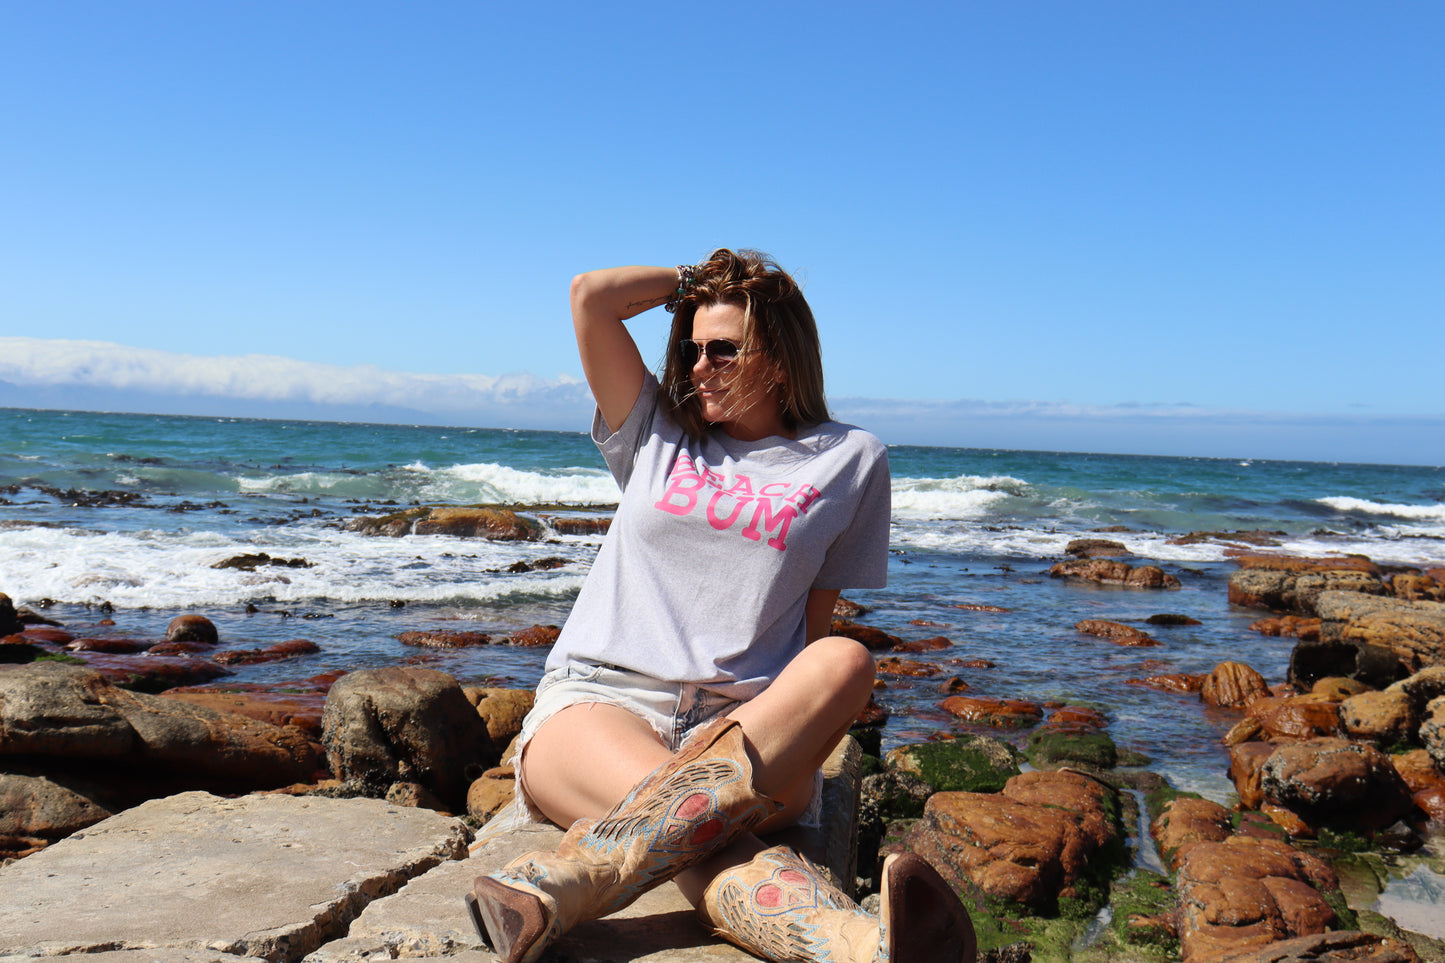 Classic grey Beach bum tee with hot pink lettering